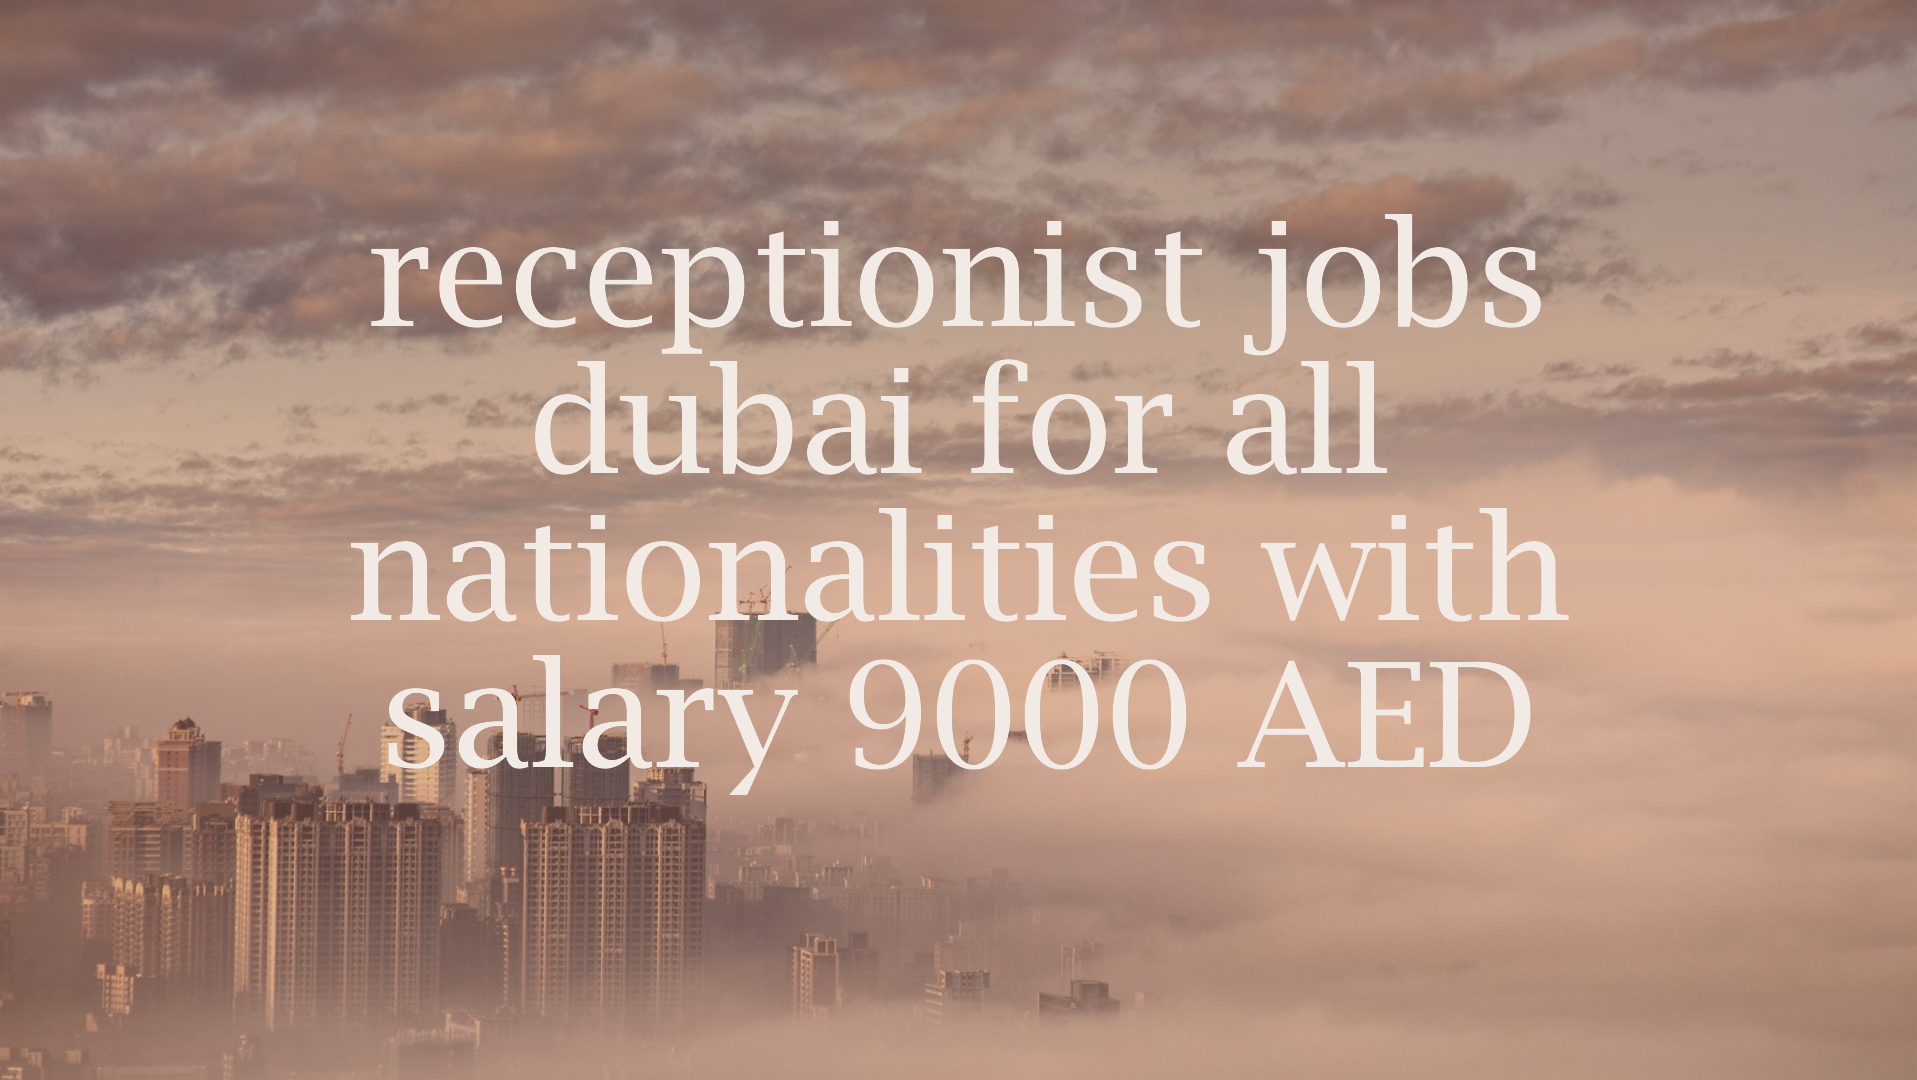 receptionist jobs dubai for all nationalities with salary 9000 AED